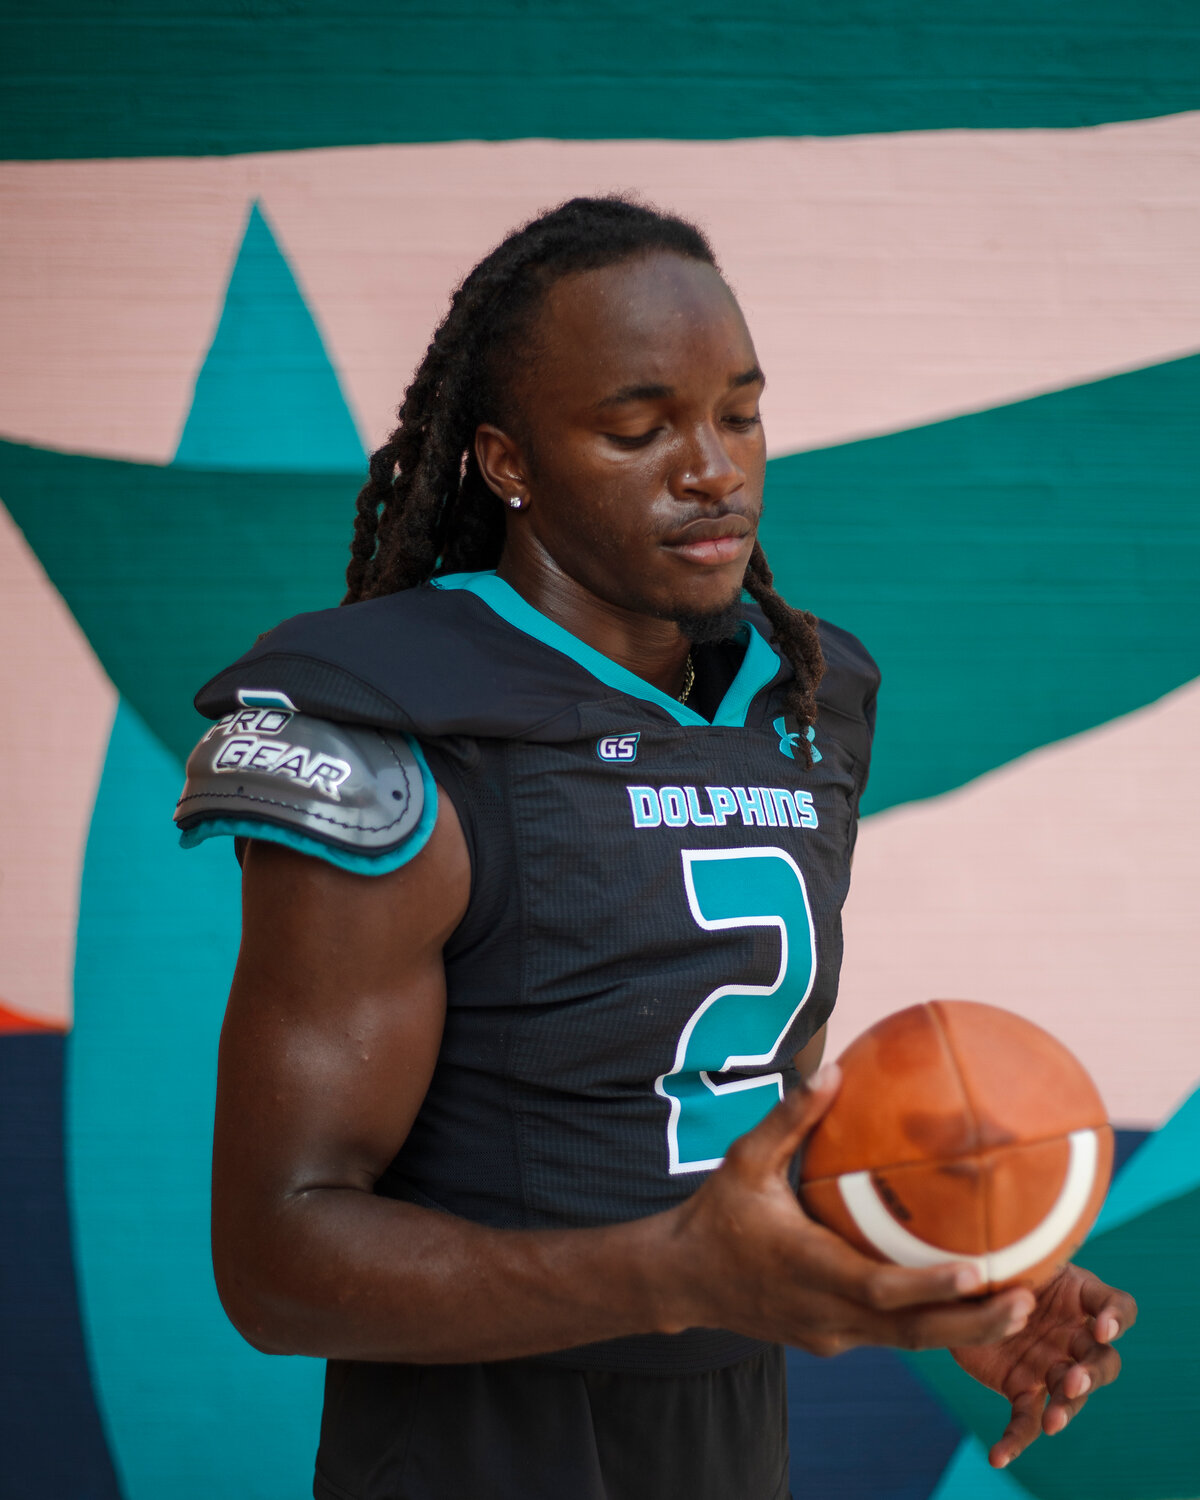 Ronnie Royal and the Gulf Shores Dolphins were set to kick off the regular season against the St. Michael Catholic Cardinals at home on Thursday, Aug. 24. Royal enters his senior campaign with a commitment to North Carolina State at the end of a long, winding recruiting road.